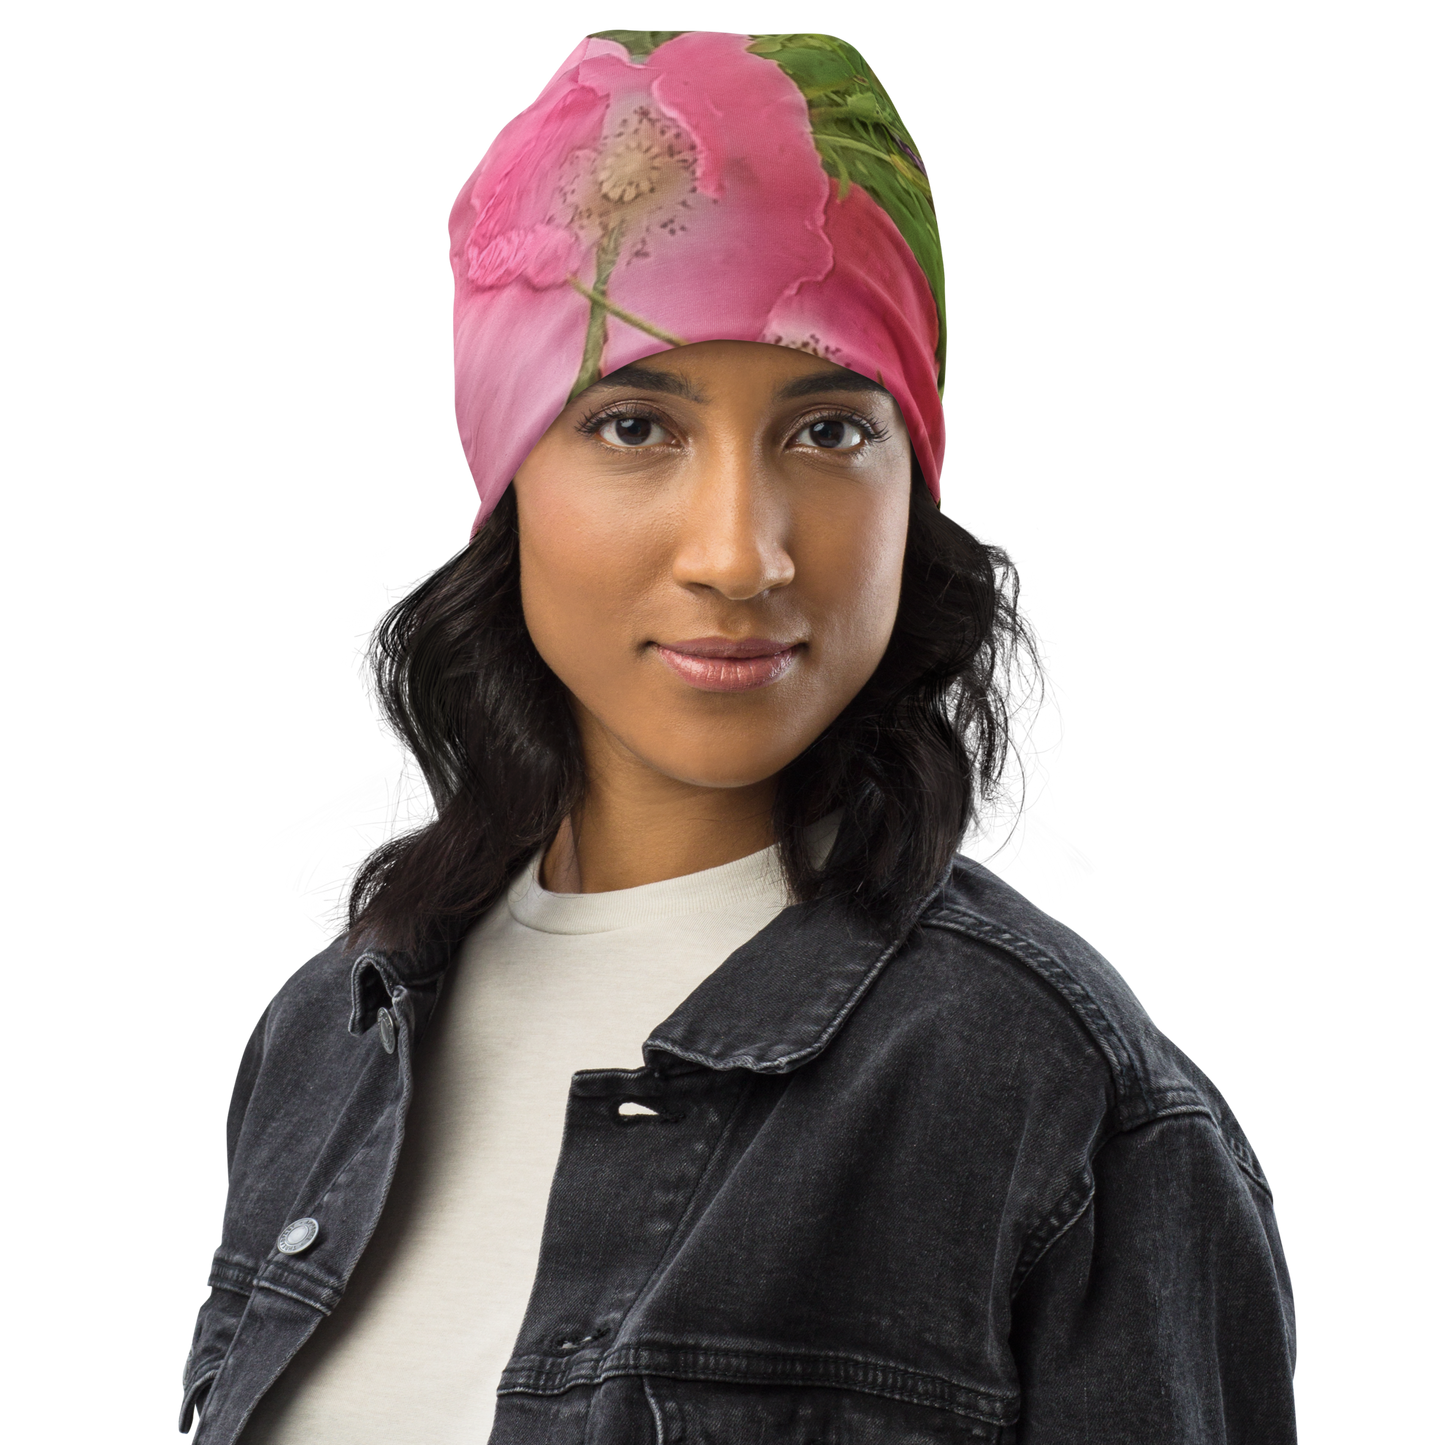 The FLOWER LOVE Collection - "Pretty Pink Poppies" Design Beanie - Lightweight, Cute Chemo Hat